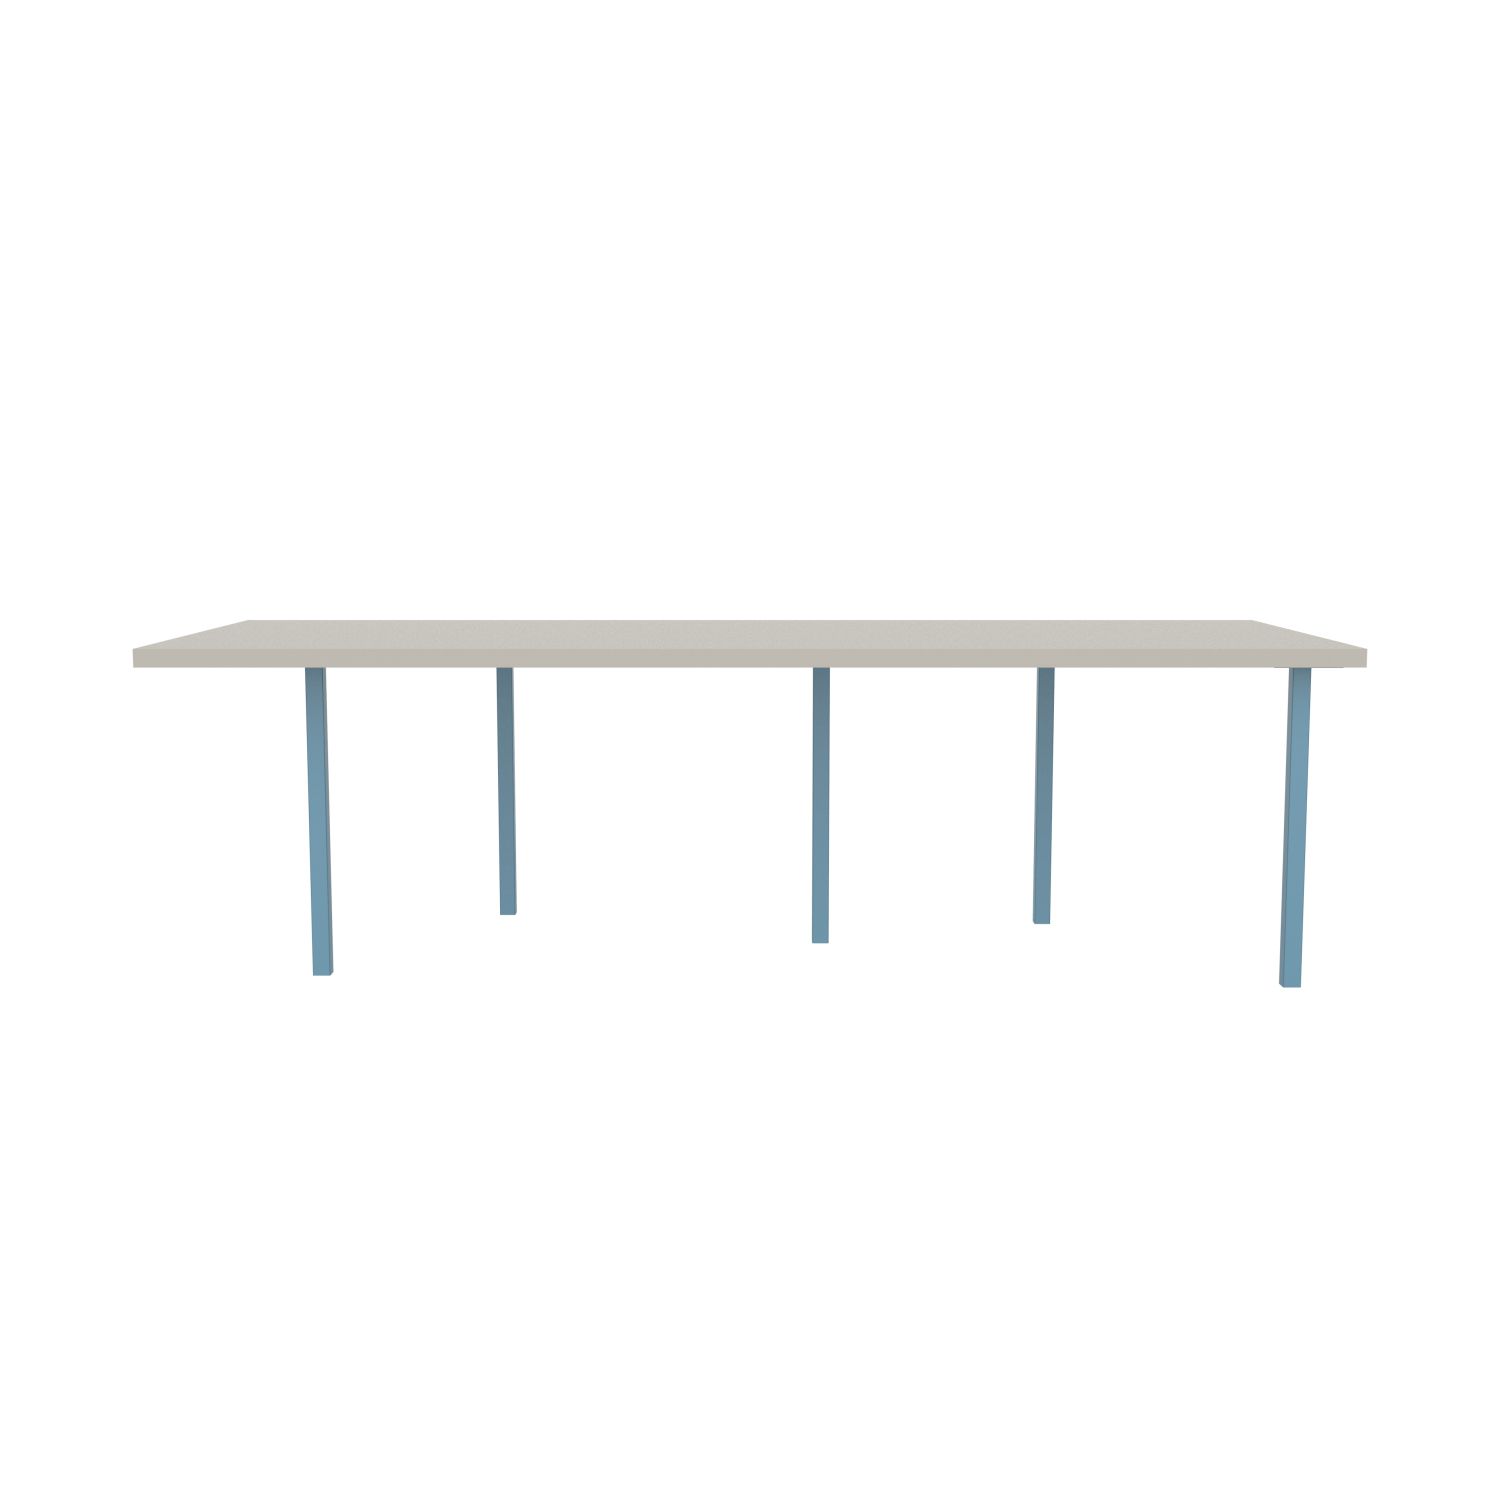 lensvelt bbrand table five fixed heigt 103x264 hpl white 50 mm price level 1 blue ral5024